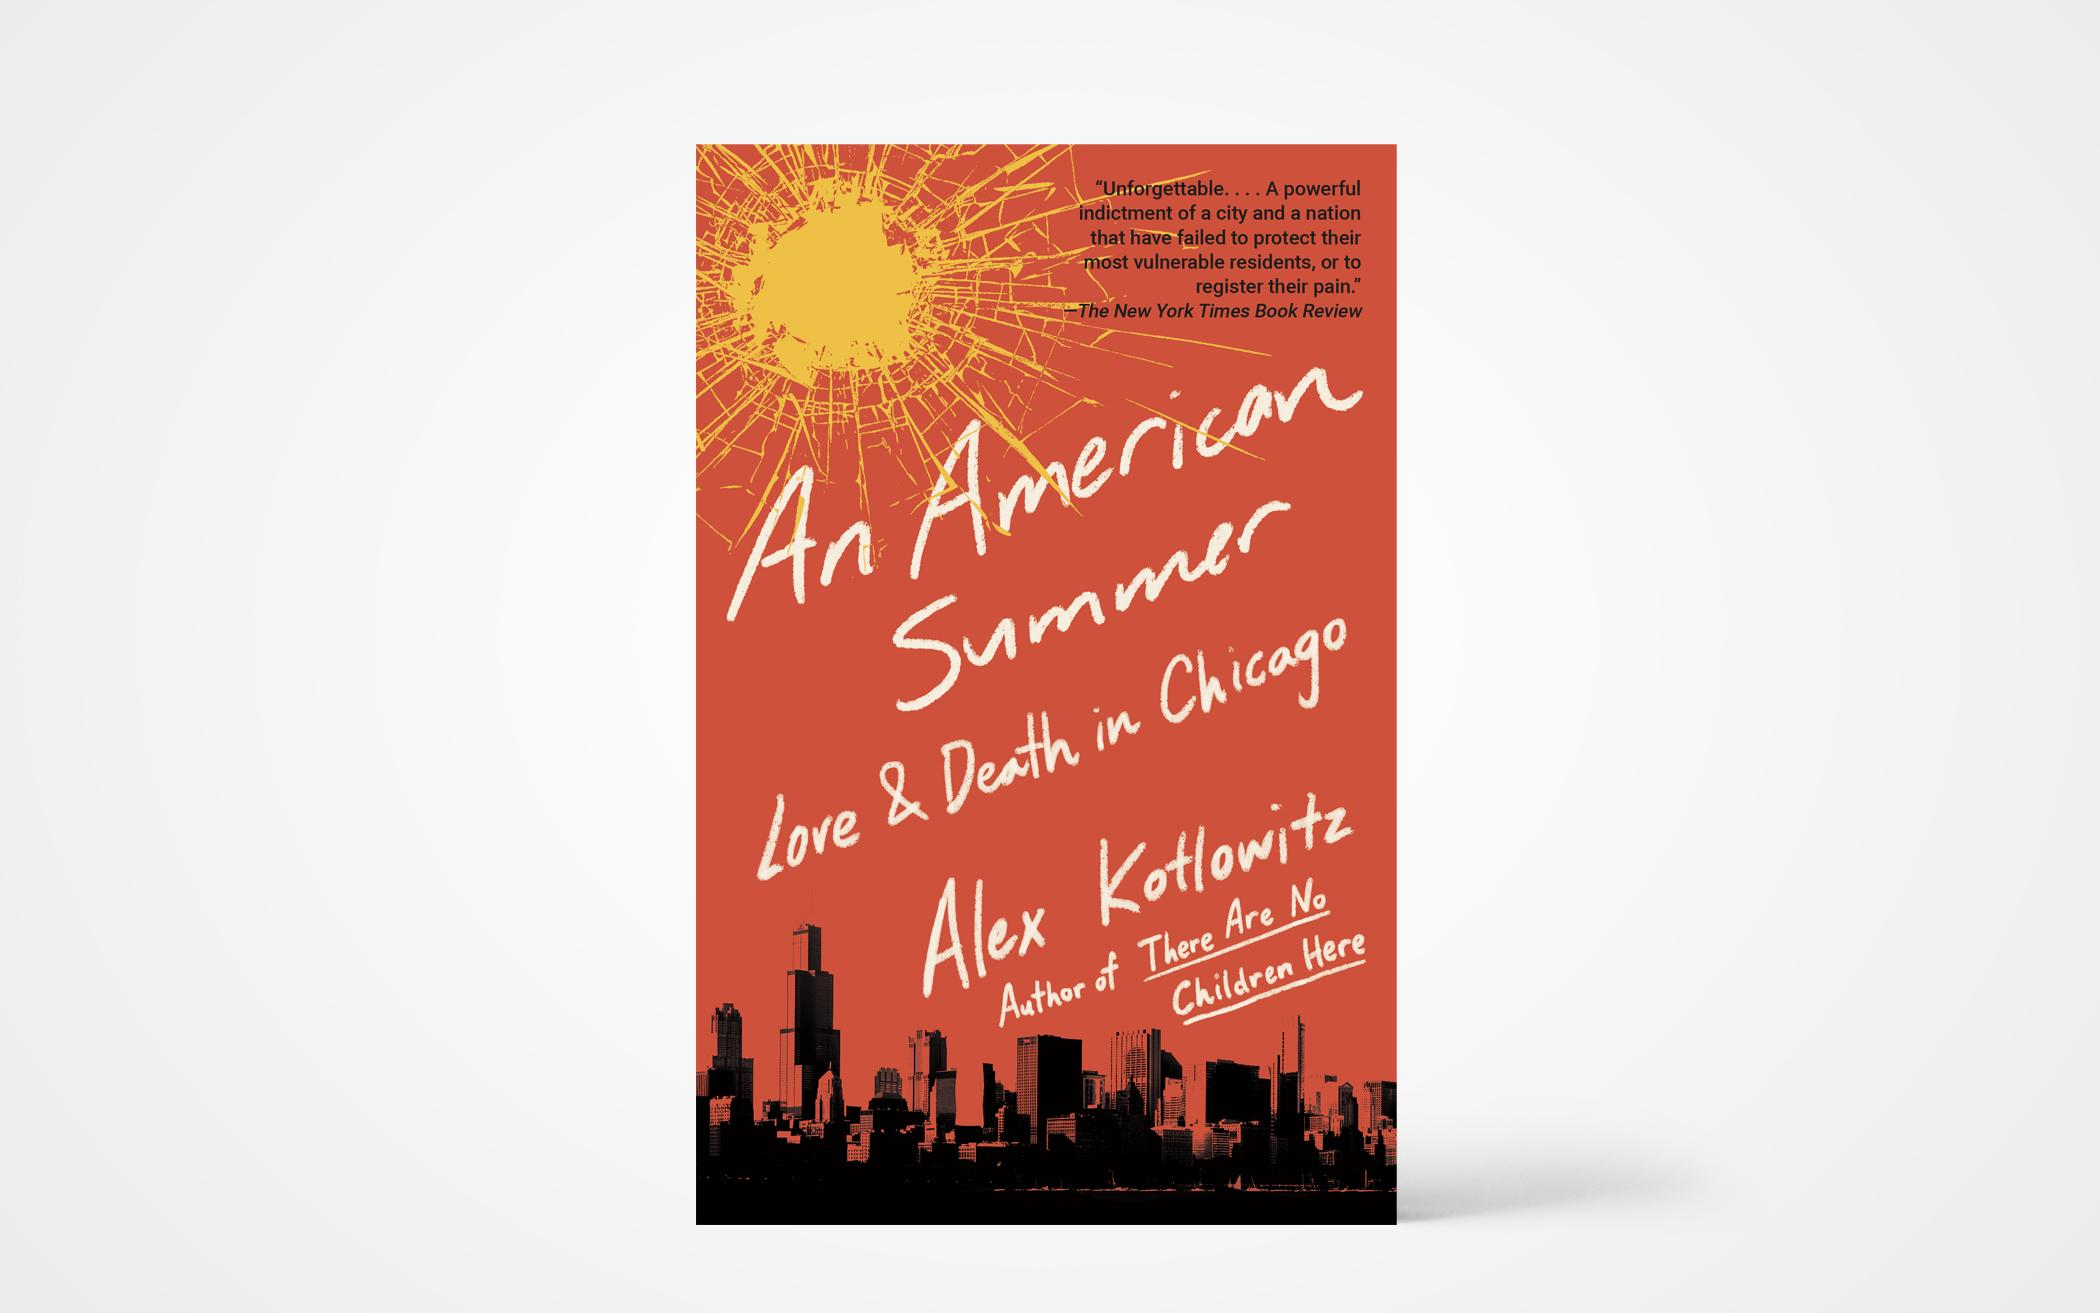 An American Summer: Love and Death in Chicago